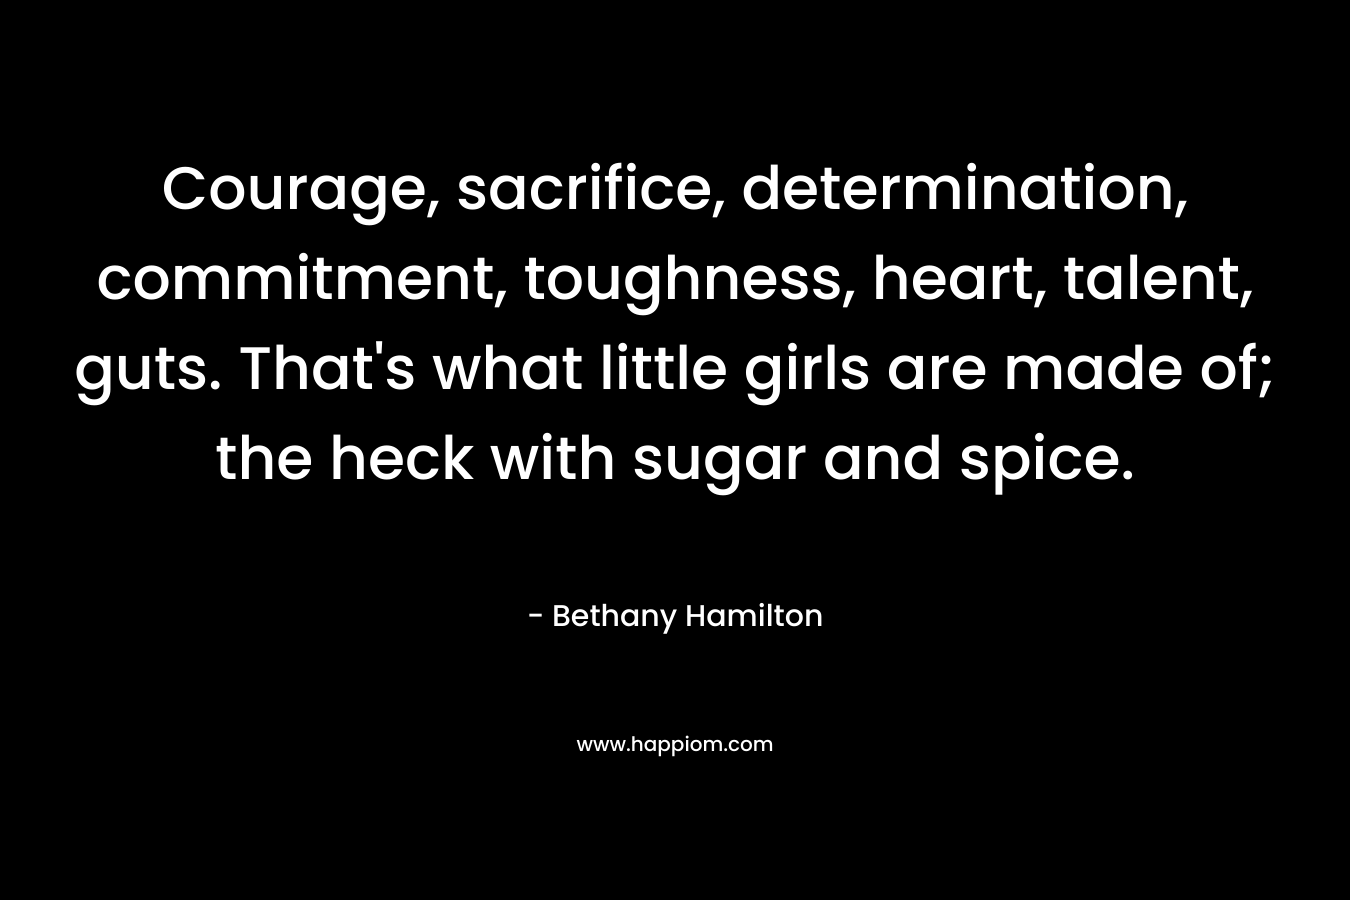 Courage, sacrifice, determination, commitment, toughness, heart, talent, guts. That's what little girls are made of; the heck with sugar and spice.